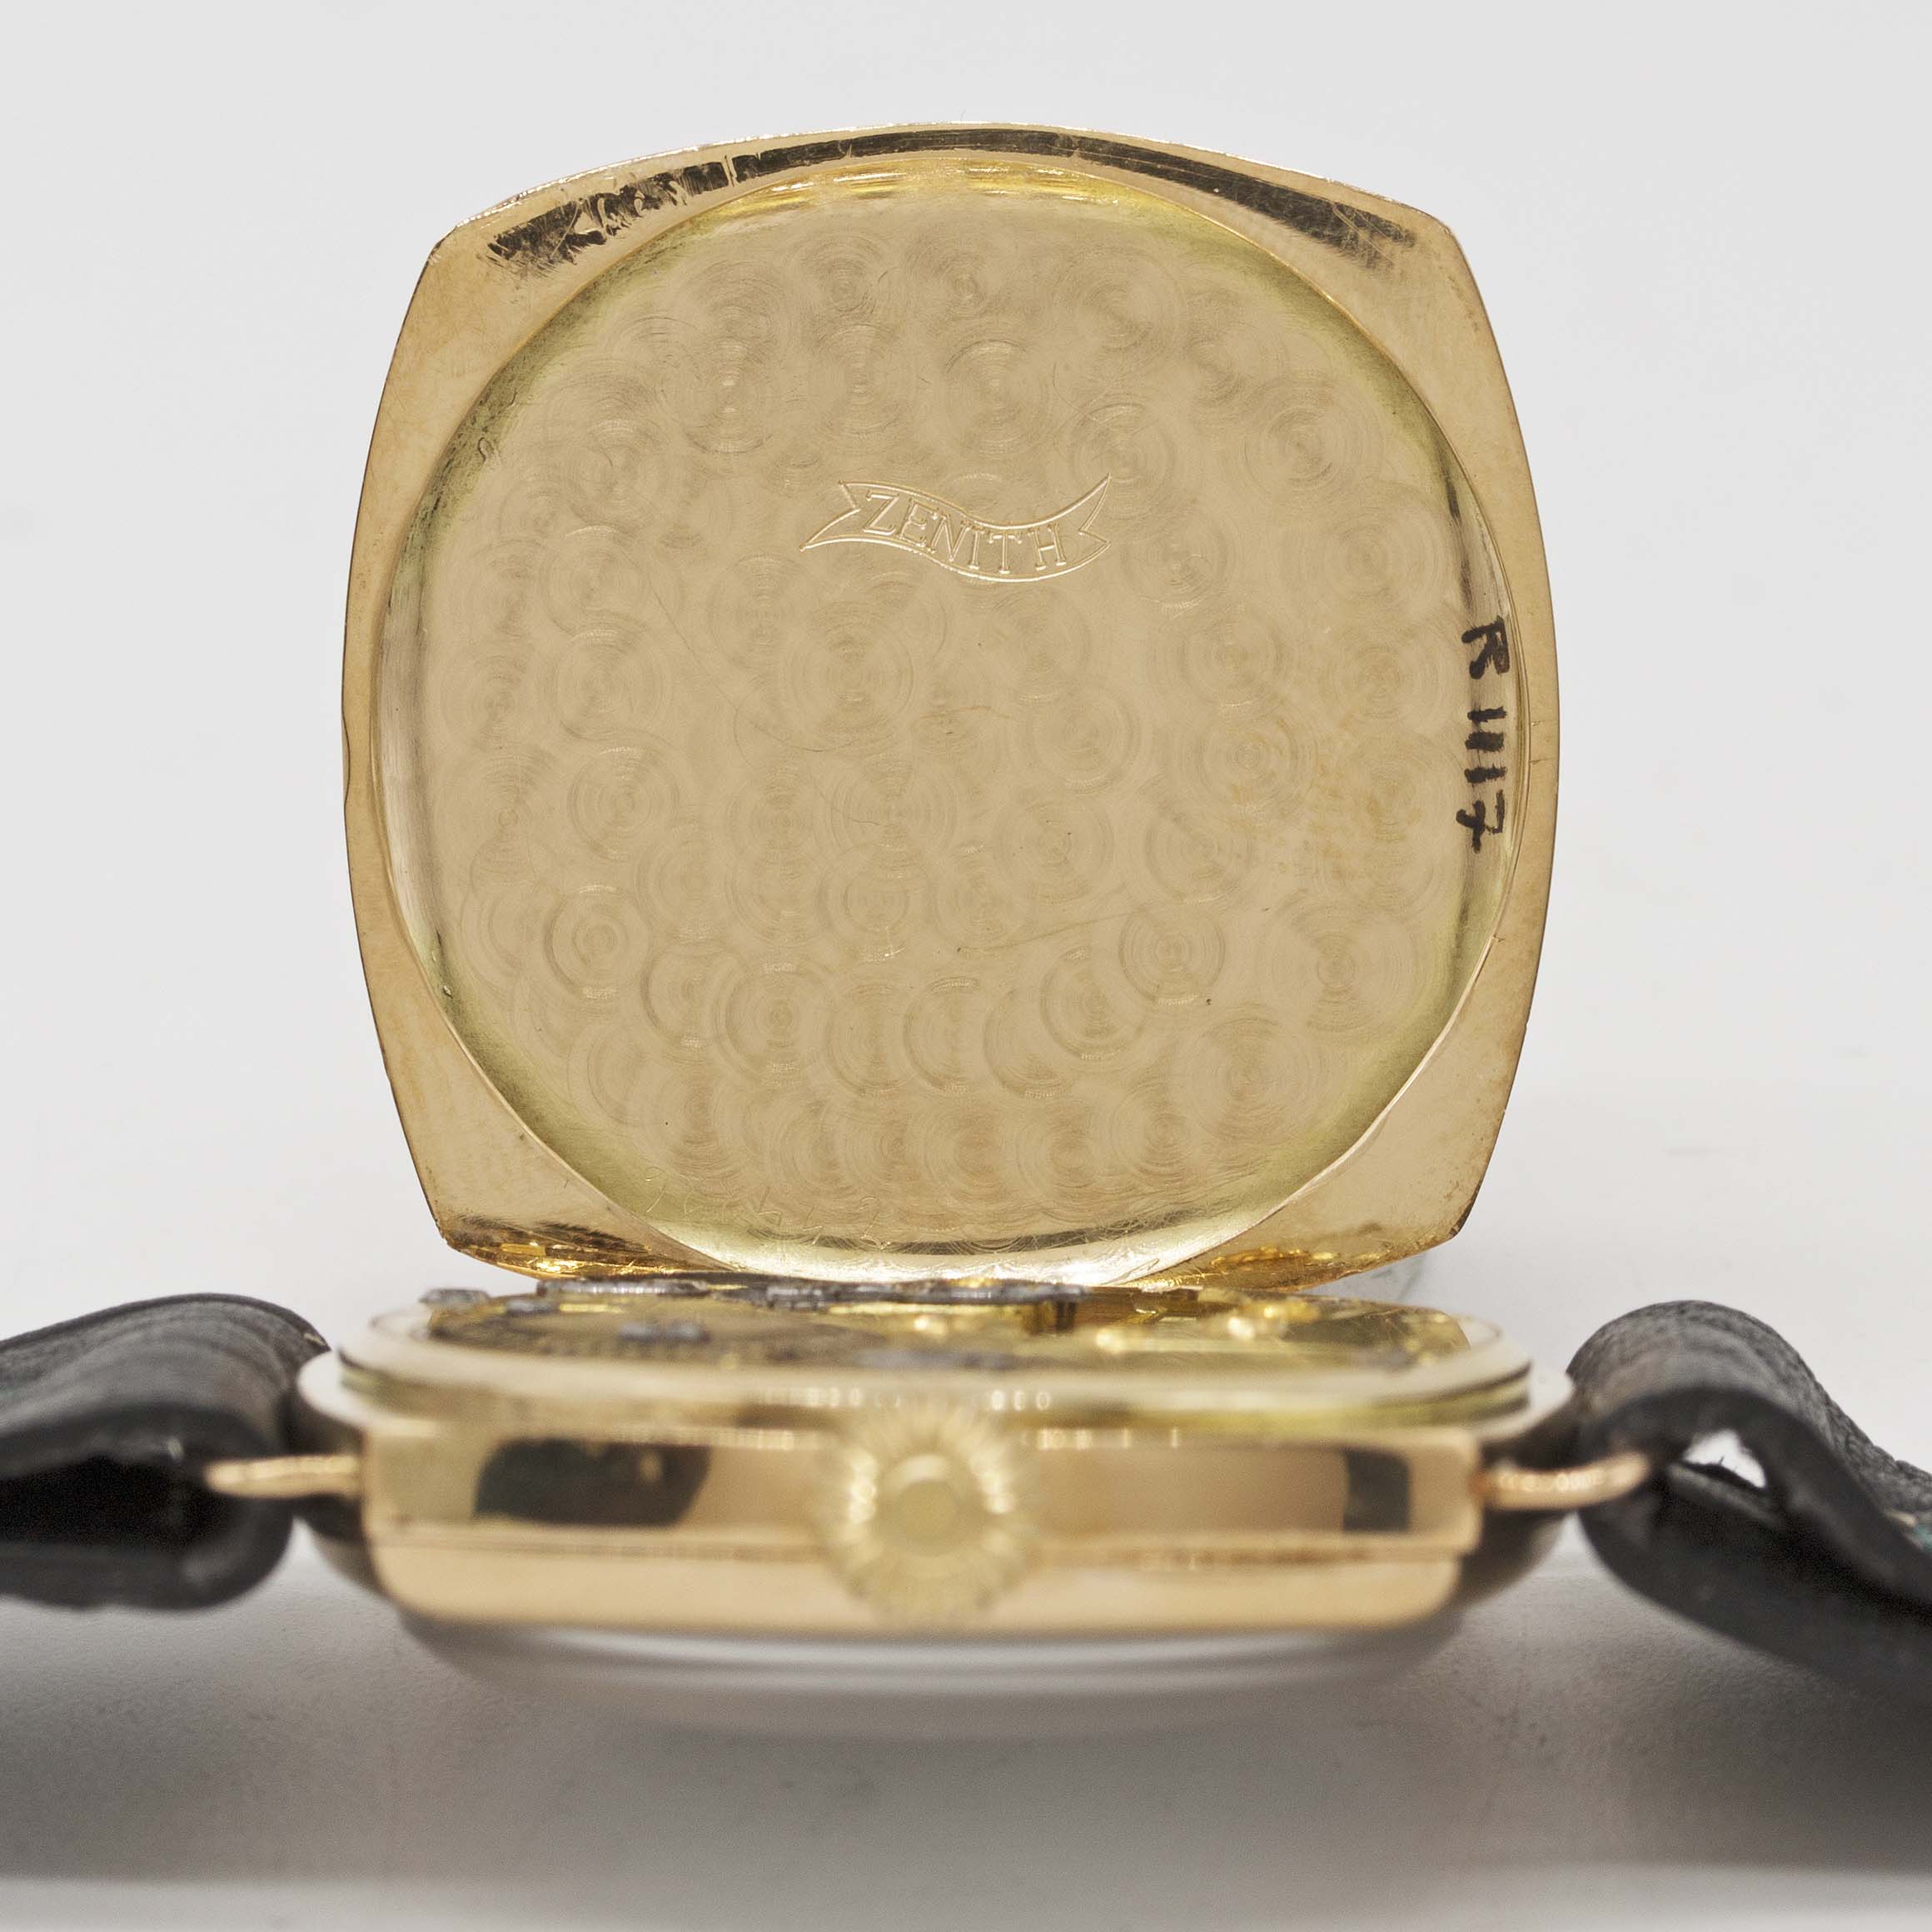 A GENTLEMAN'S 18K SOLID GOLD ZENITH "CUSHION" WRIST WATCH CIRCA 1920, WITH 24 HOUR PORCELAIN - Image 5 of 5